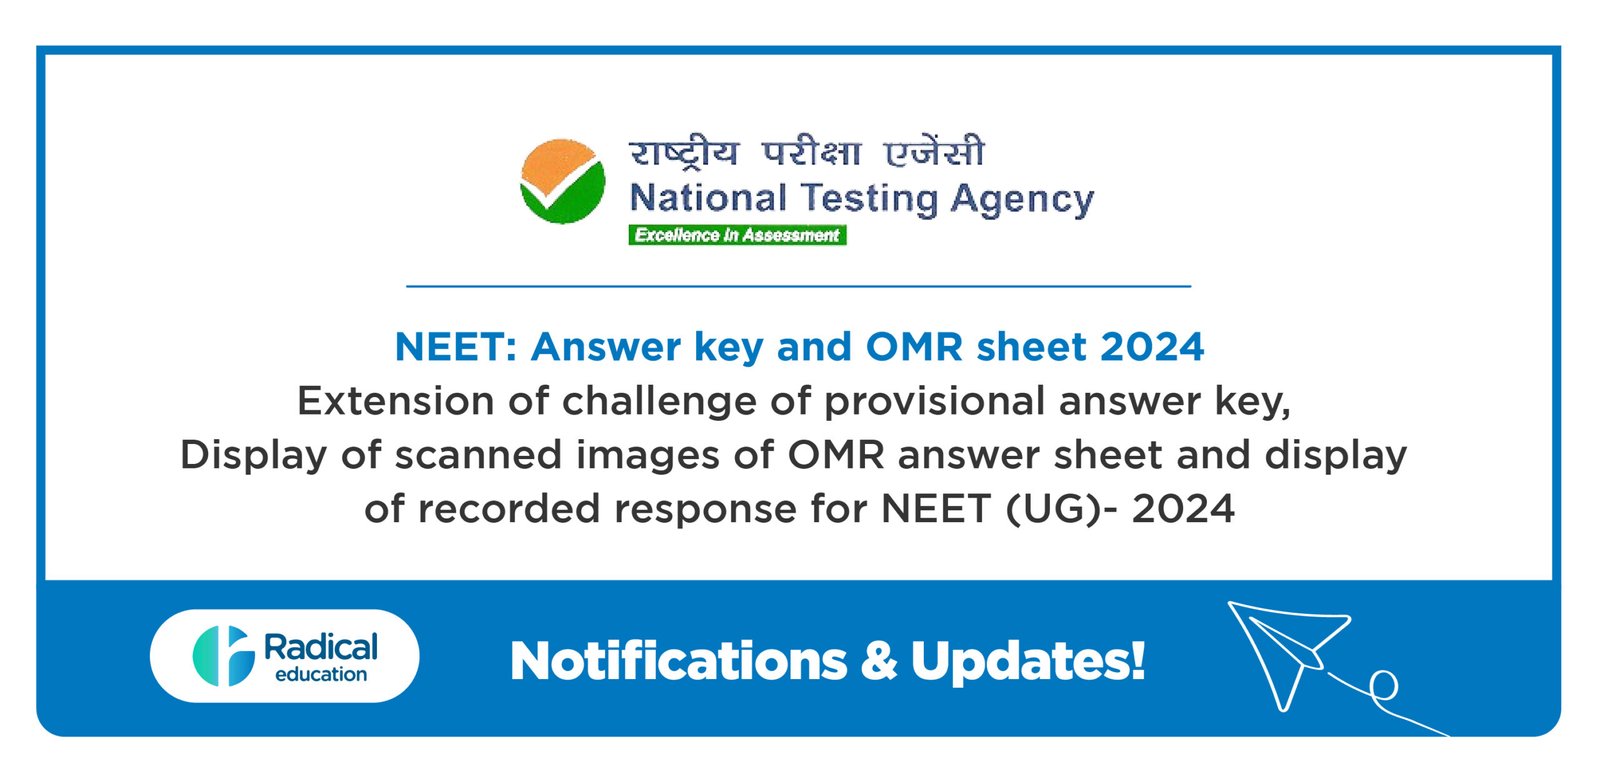 Extension of challenge of provisional answer key, Display of scanned images of OMR answer sheet and display of recorded response for NEET (UG)- 2024